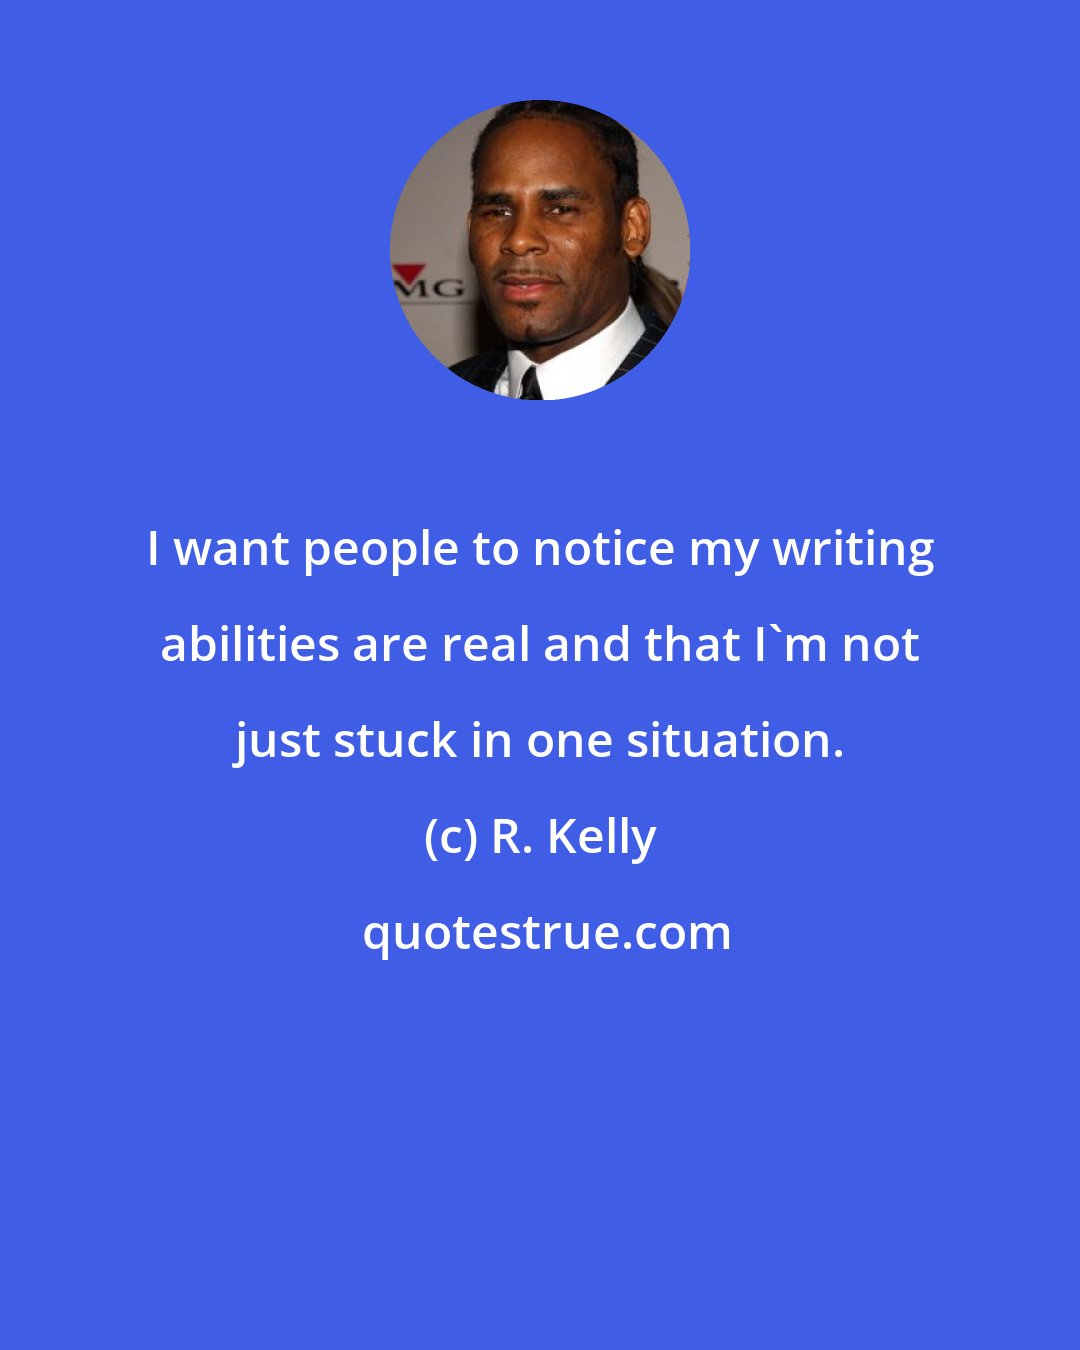 R. Kelly: I want people to notice my writing abilities are real and that I'm not just stuck in one situation.